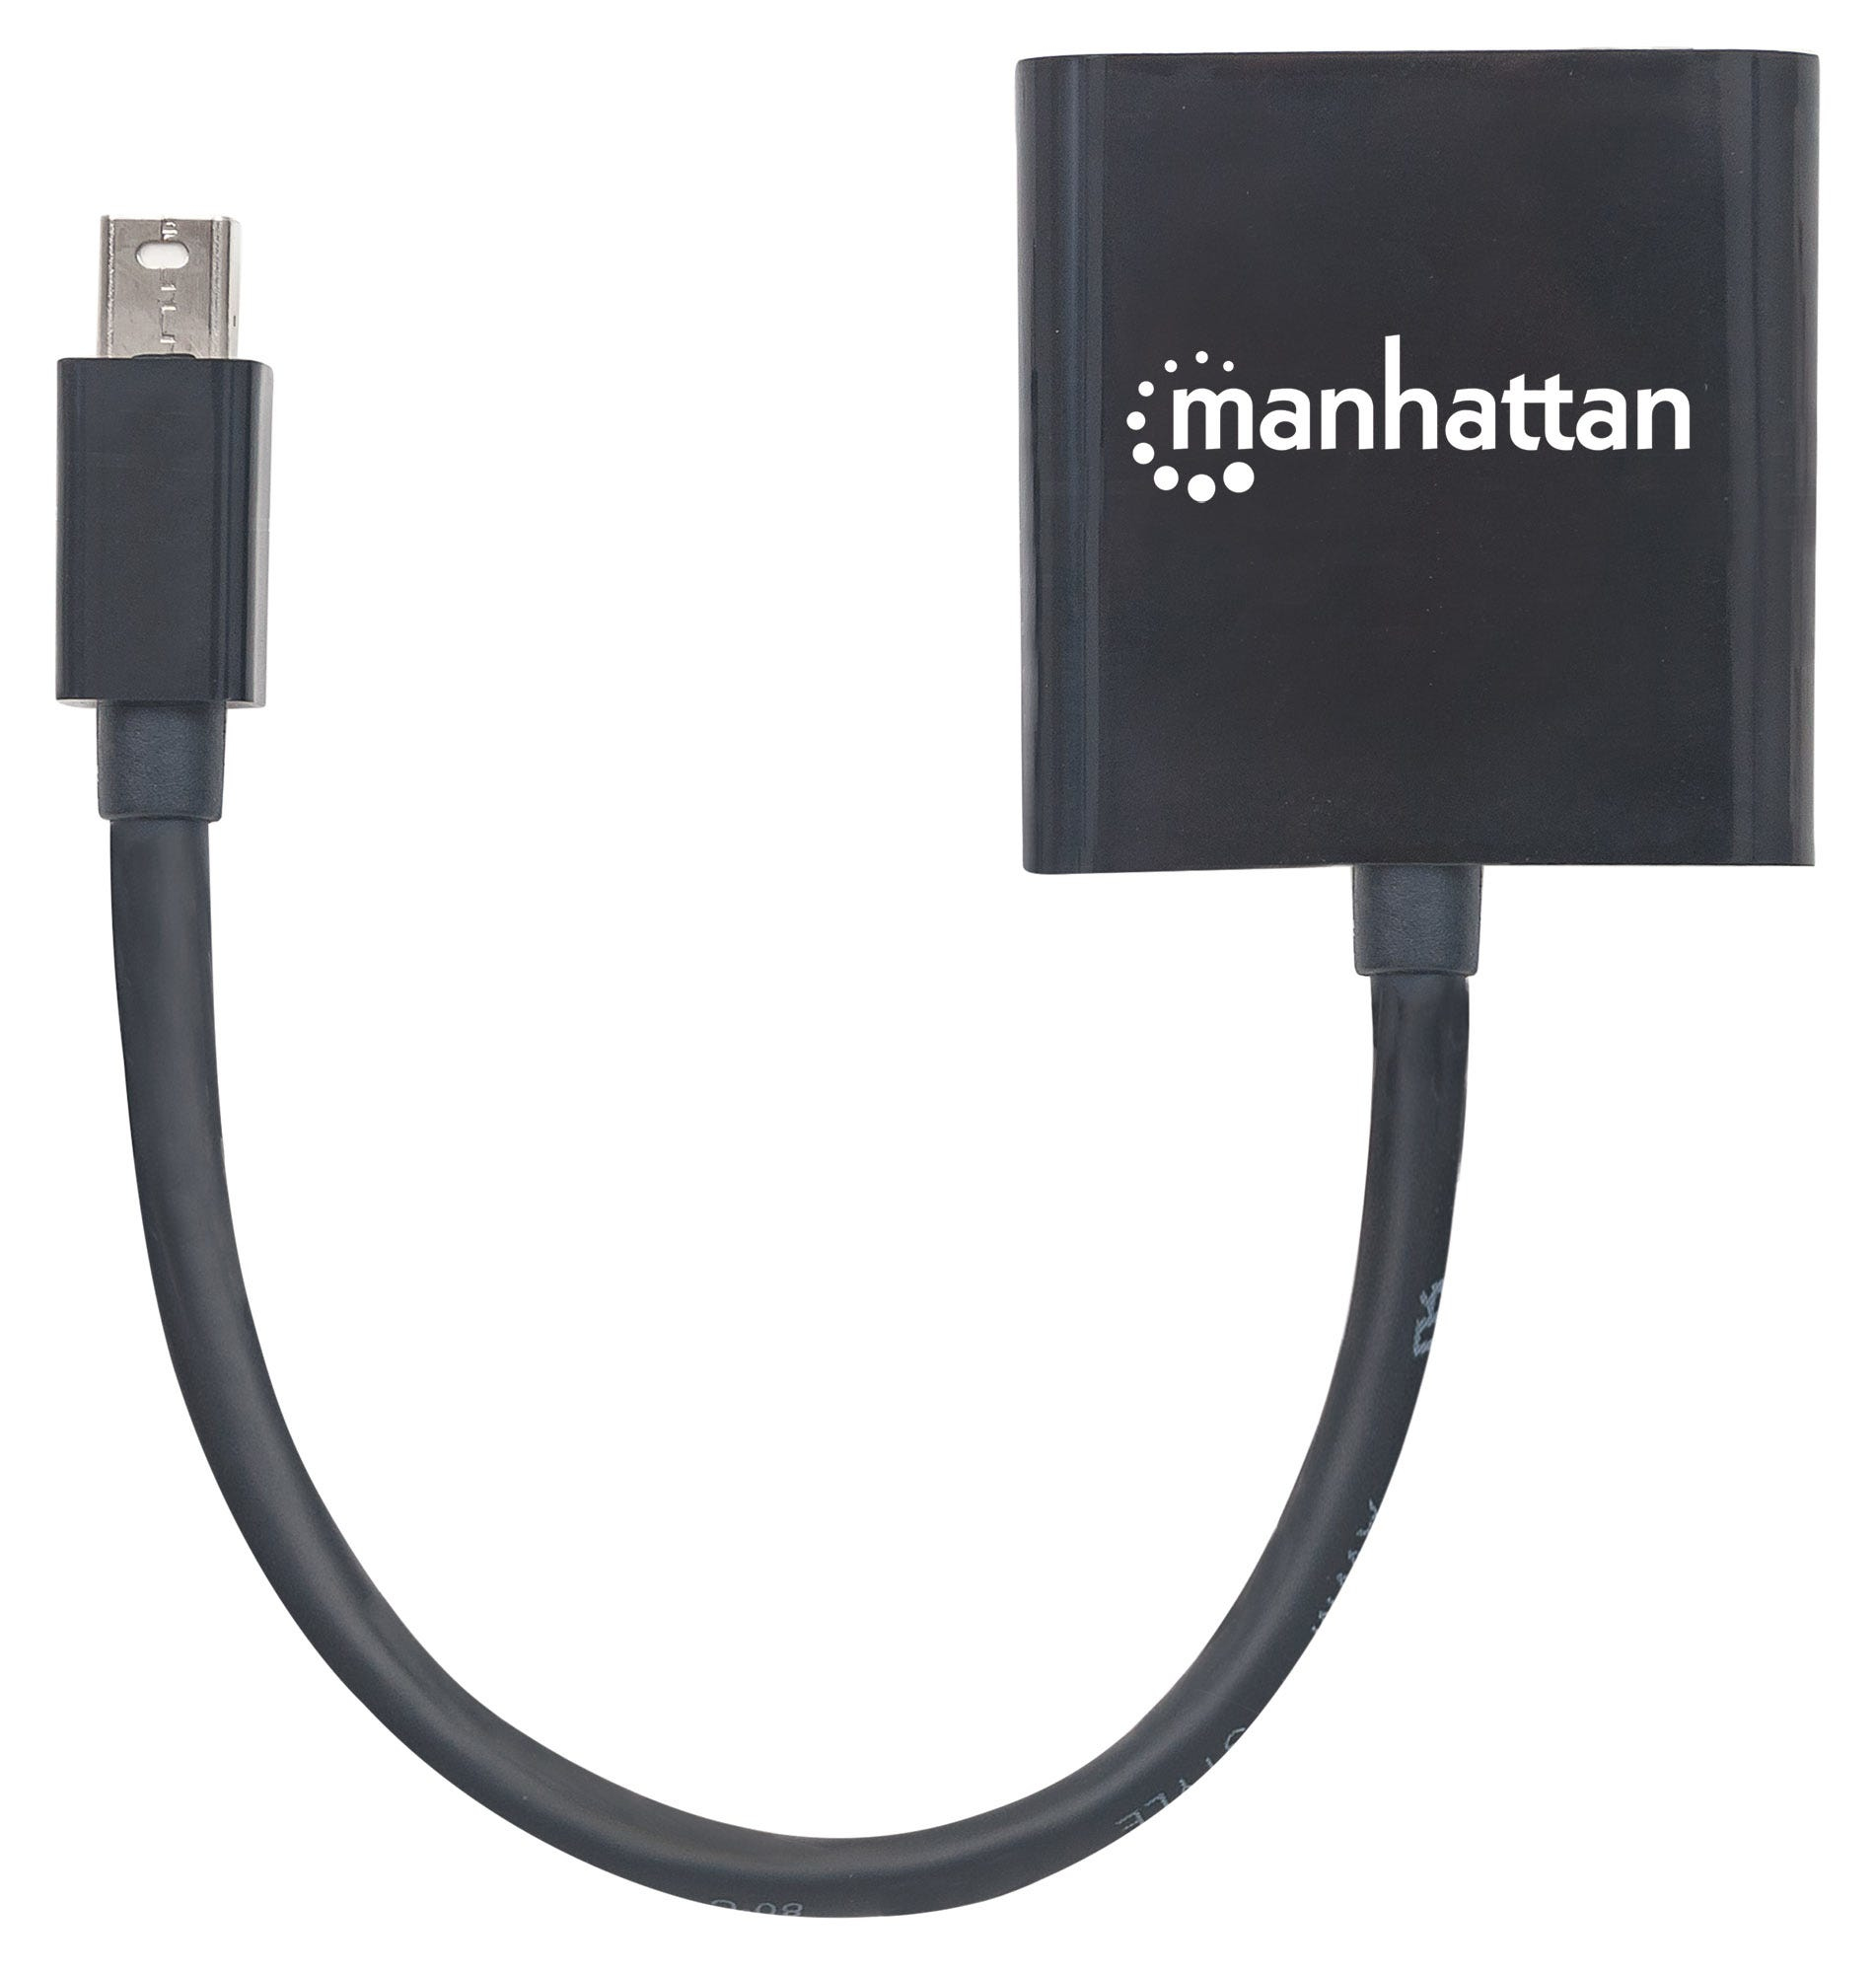 Manhattan Mini DisplayPort to DVI-I Dual-Link Adapter Cable, 19.5cm, Male to Female, Active, 3840x2160@30Hz, Compatible with DVD-D, Black, Three Year Warranty, Polybag